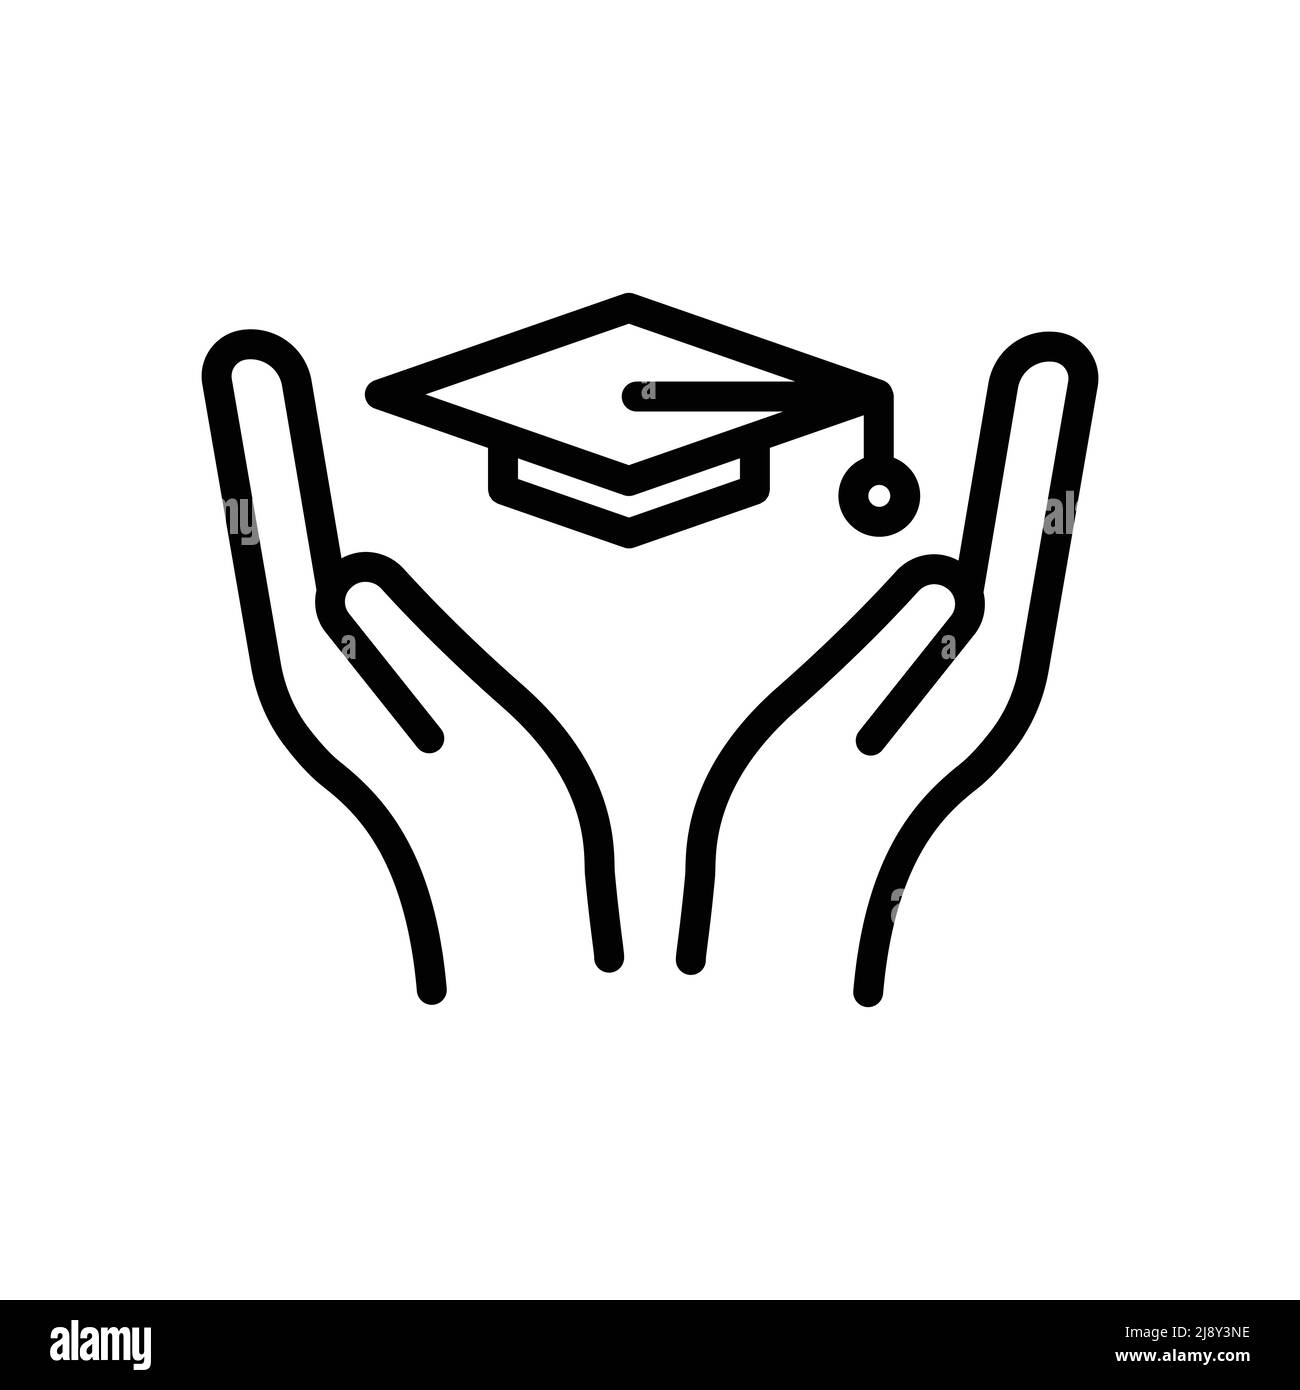 Education icon vector. graduation hat with hand. Line icon style. Simple design illustration editable Stock Vector